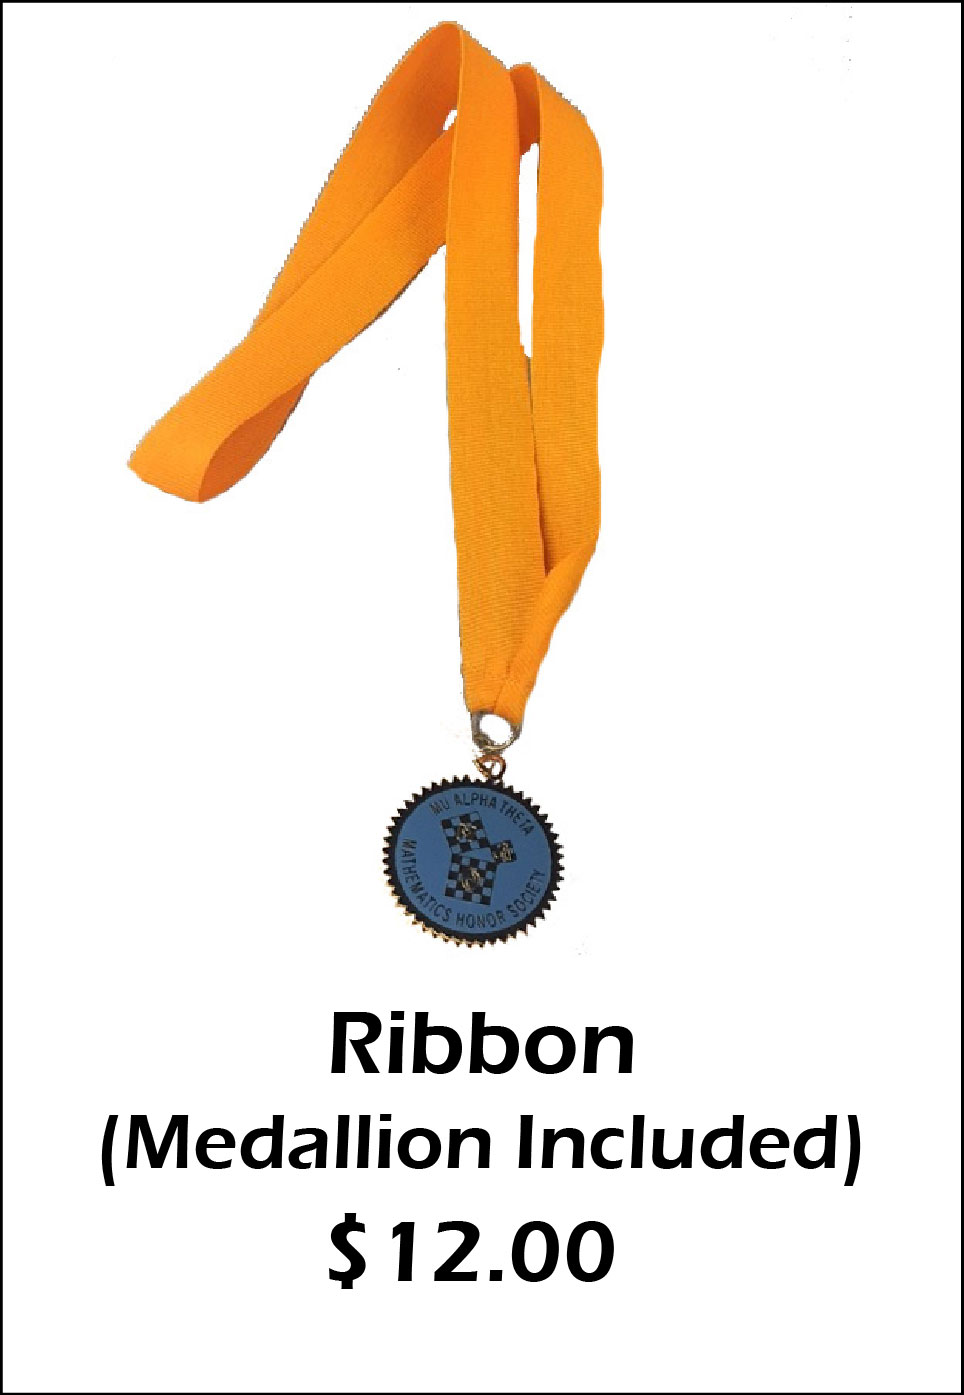 Ribbon (Medallion included) - $12